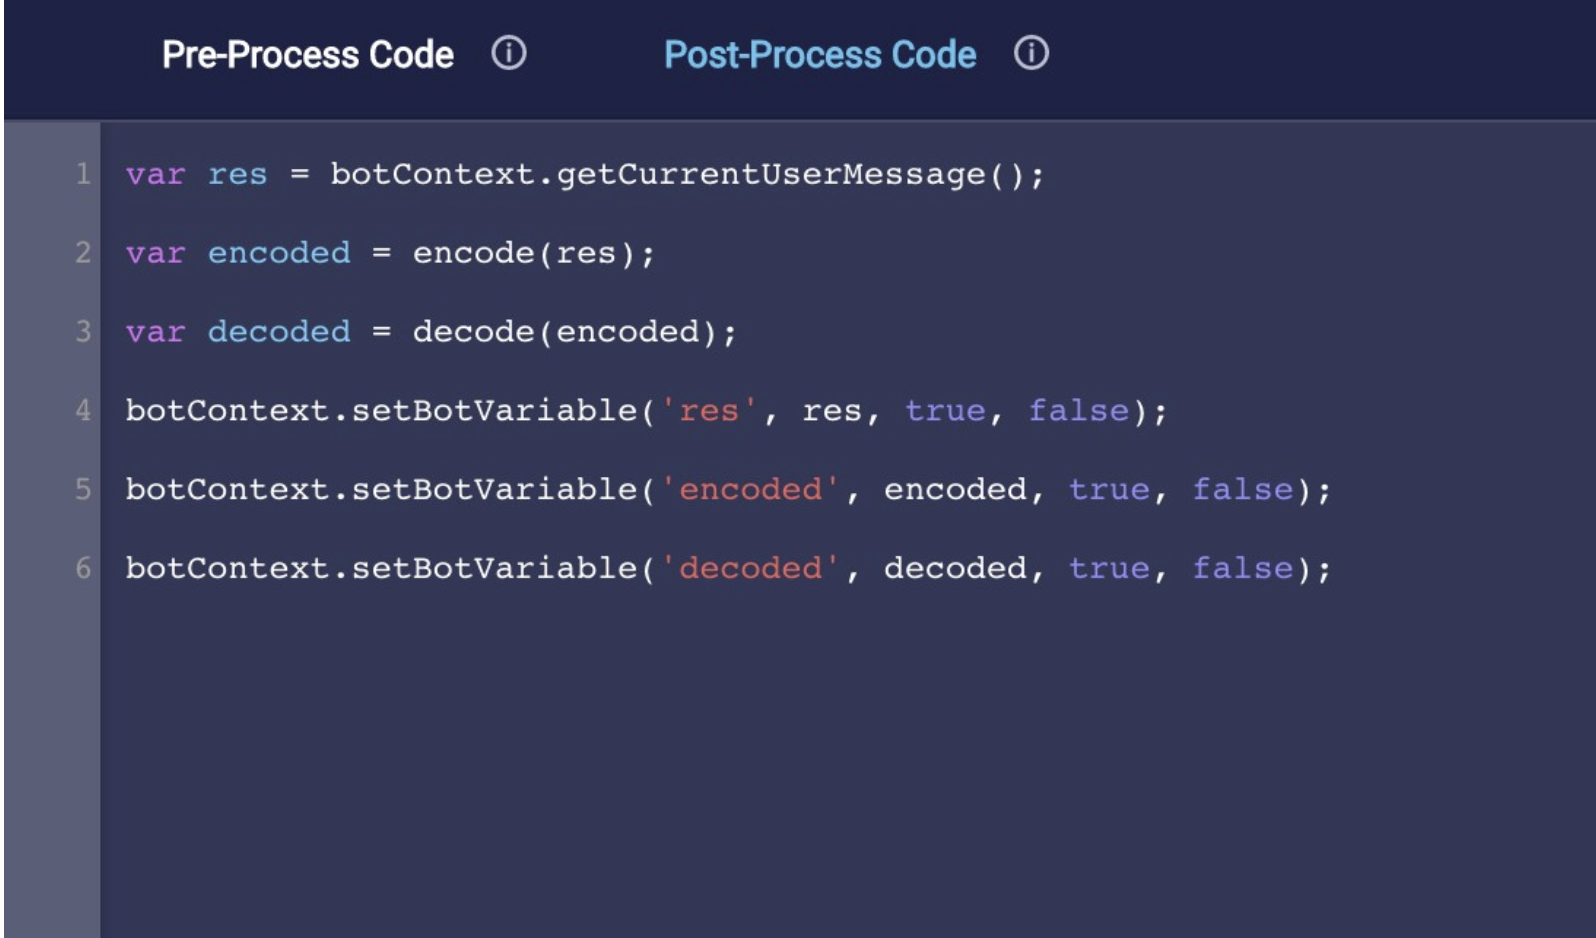 Calling the functions in the code editors